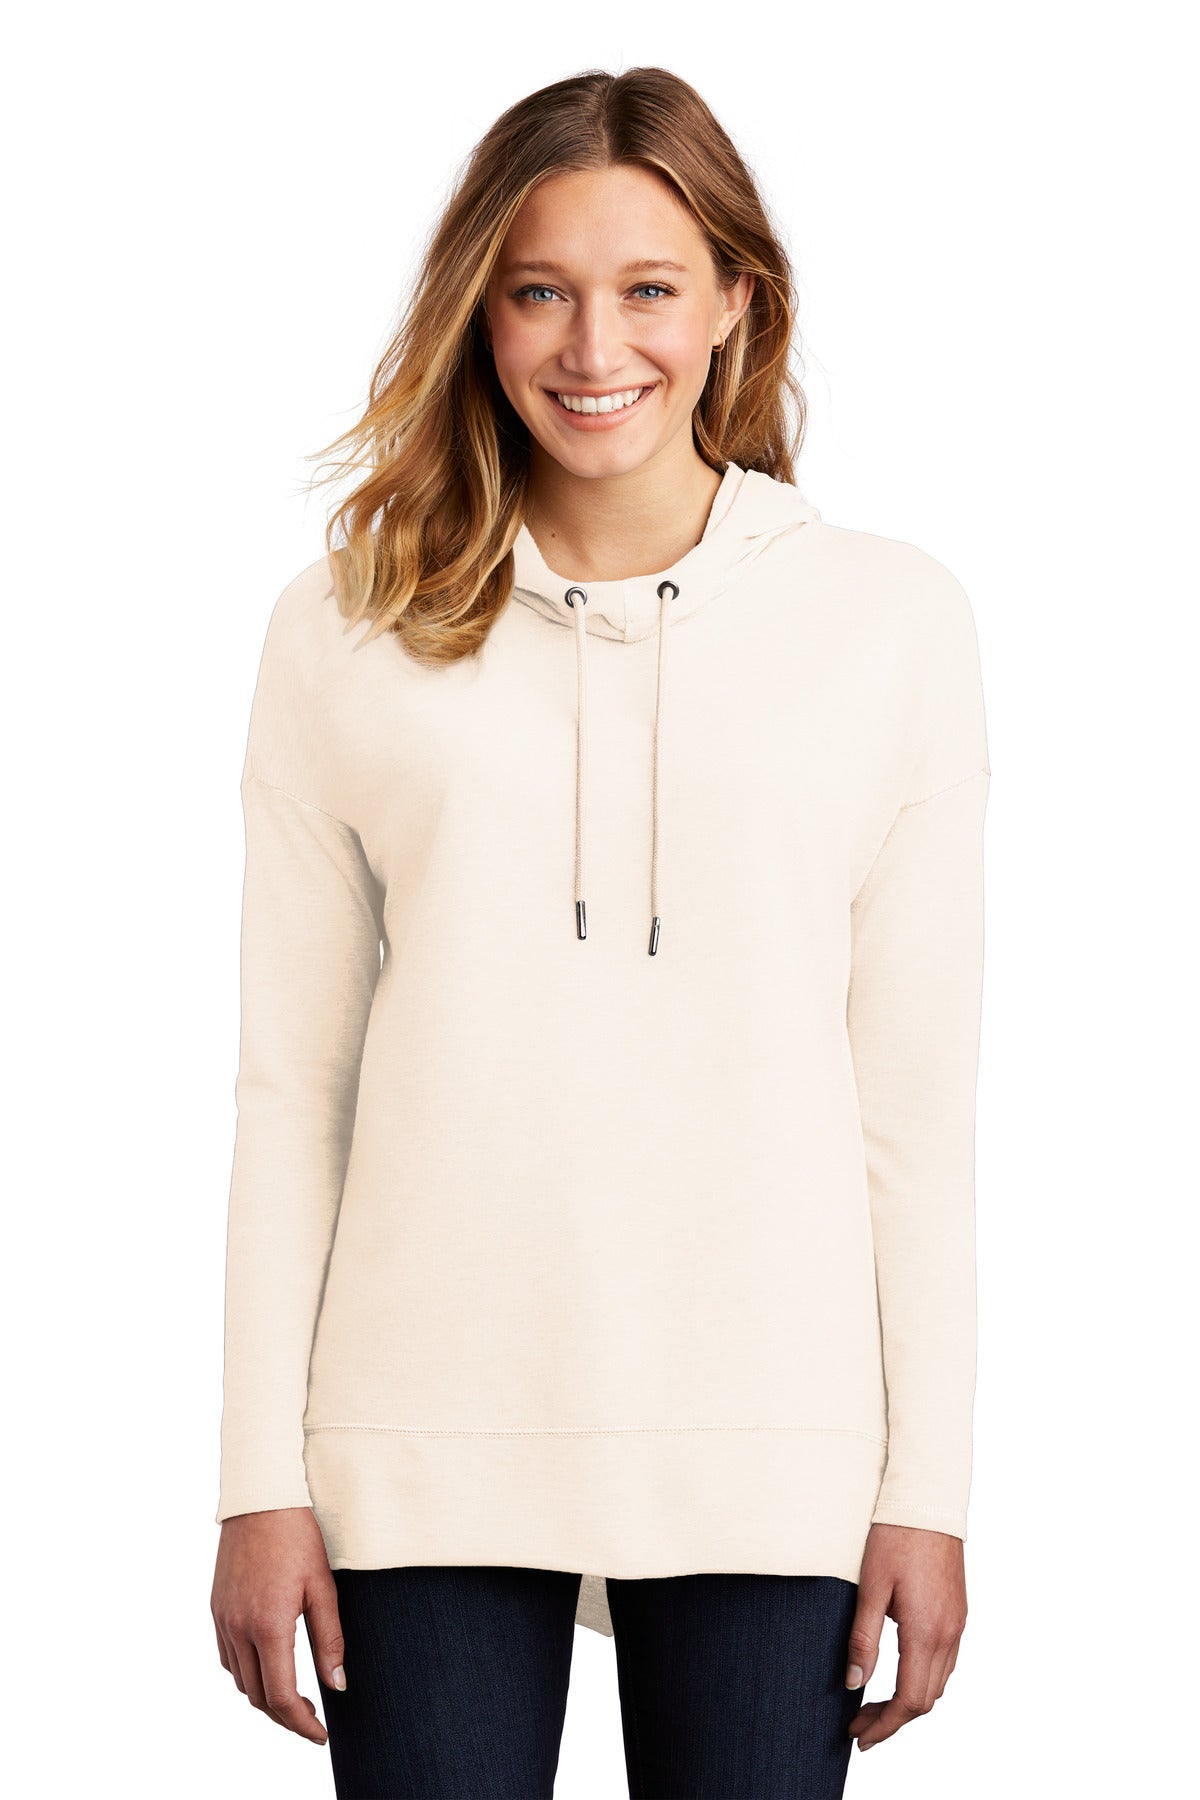 District Women's Featherweight French Terry Hoodie DT671